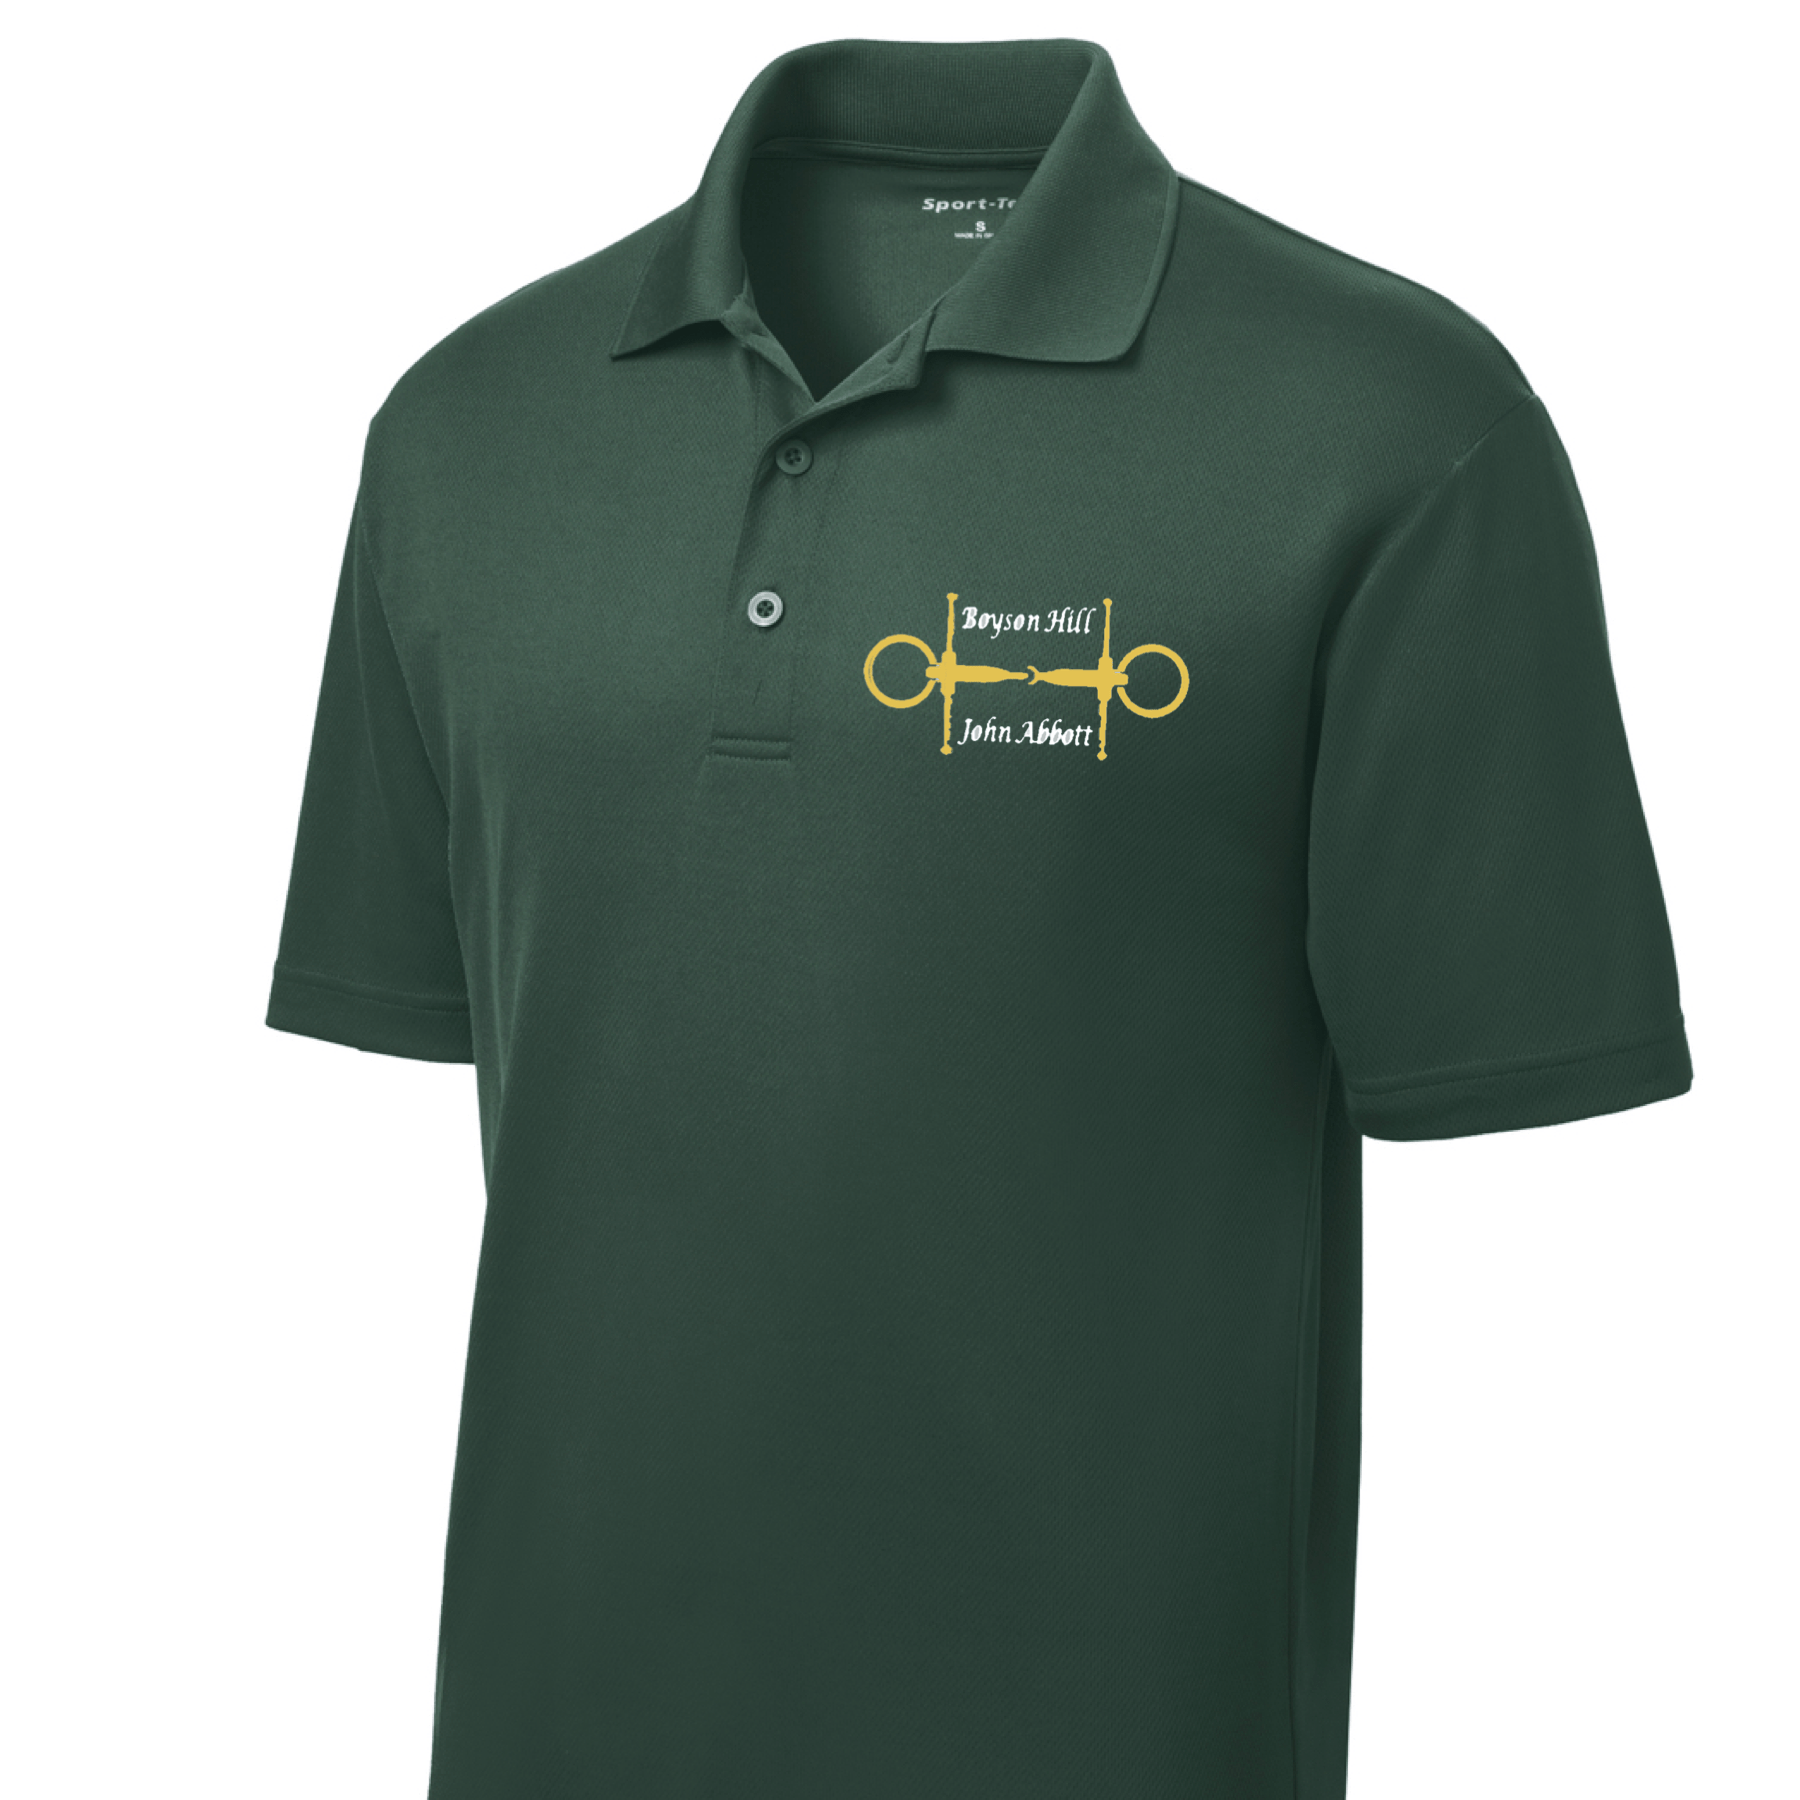 Equestrian Team Apparel Custom Team Shirts Boyson Hill Polo Shirts - Youth equestrian team apparel online tack store mobile tack store custom farm apparel custom show stable clothing equestrian lifestyle horse show clothing riding clothes horses equestrian tack store